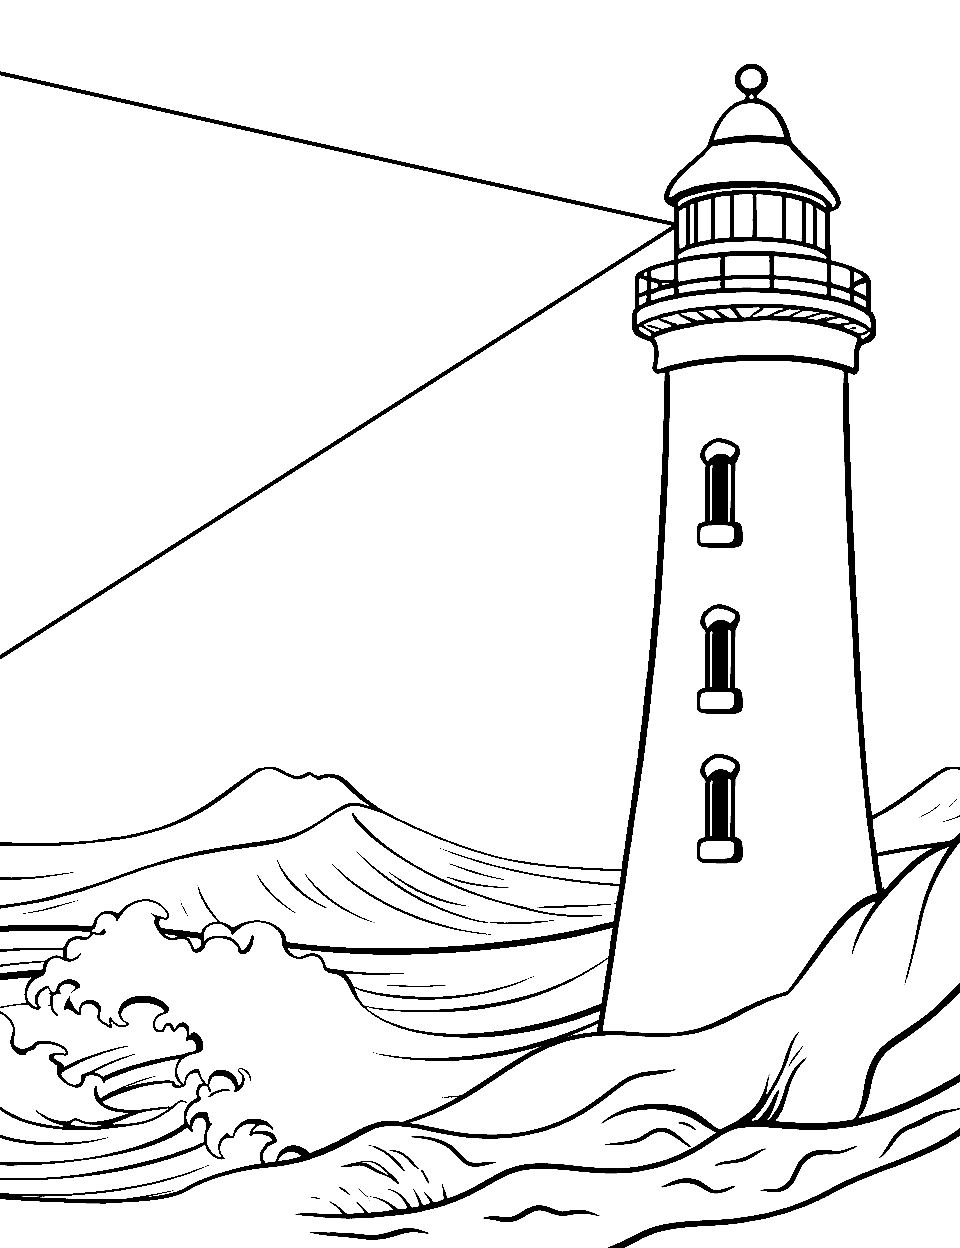 Lighthouse by the Sea Ocean Coloring Page - A tall lighthouse on a cliff with the ocean in the background.